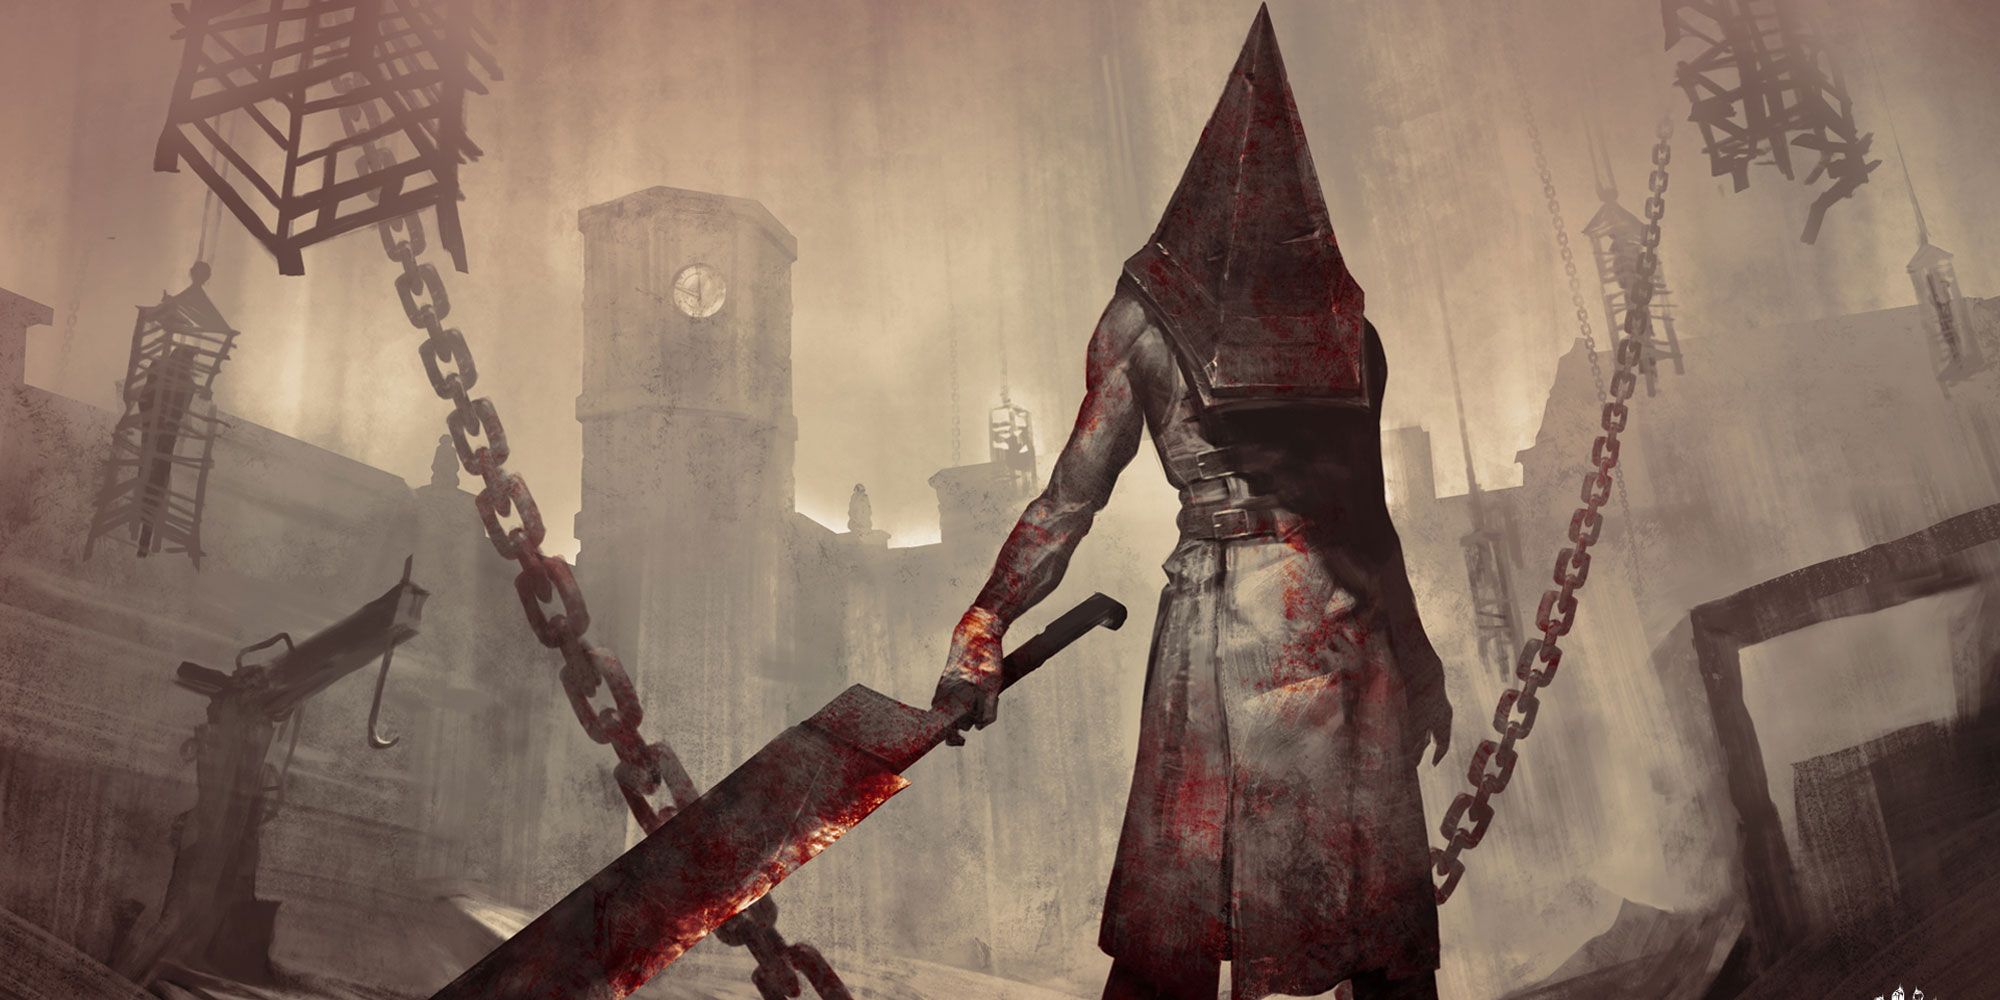 Pyramid Head from the Silent Hill wields his Great Knife in Franchise artwork for Dead by Daylight. 